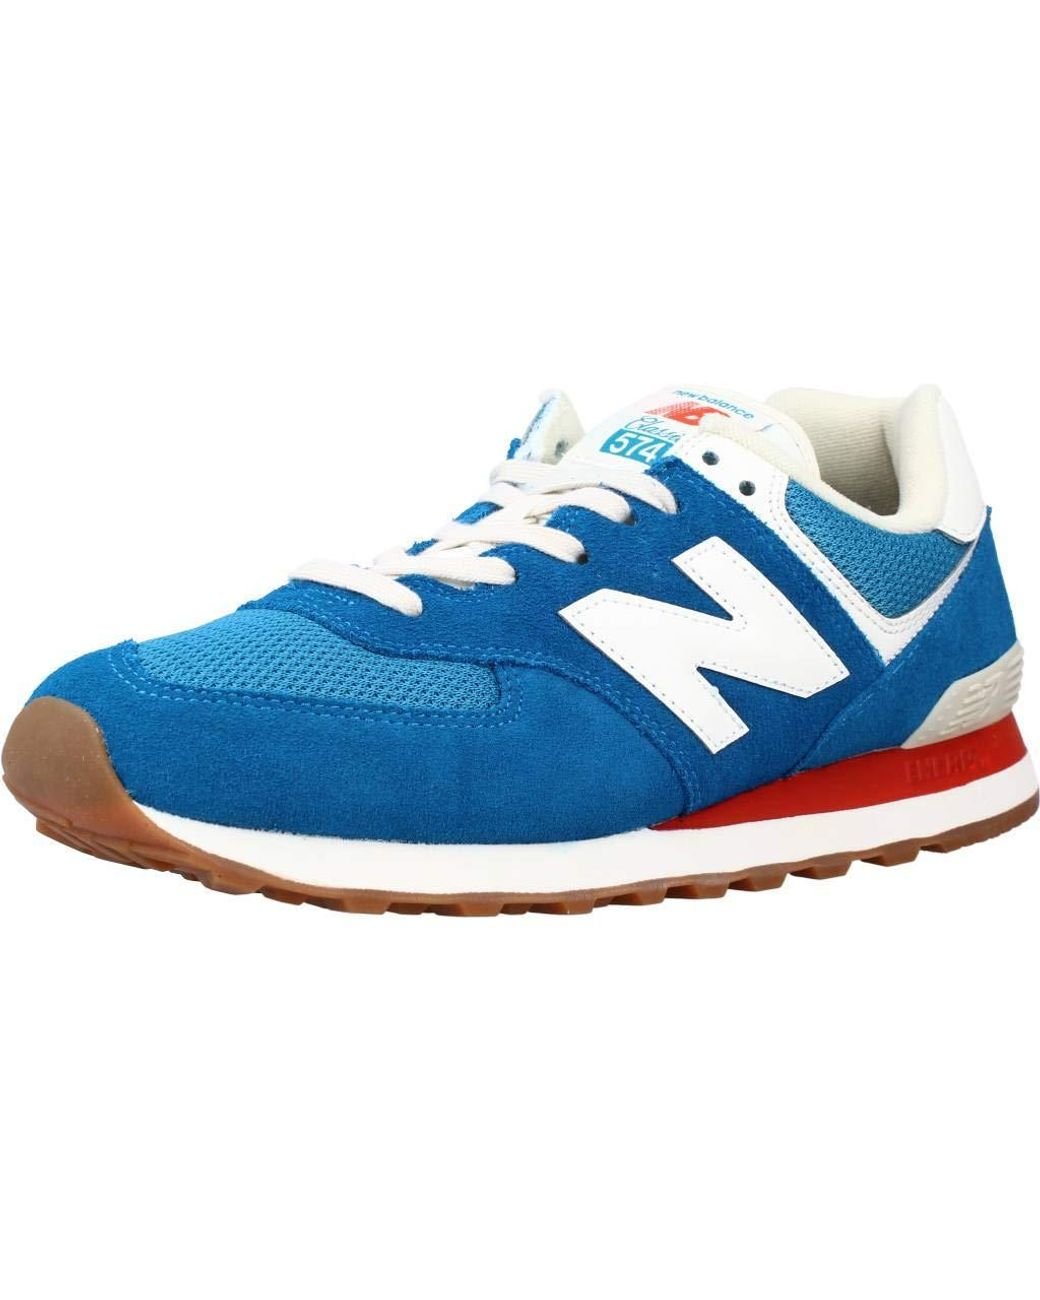 New Balance 574 S Blue/red Trainers-uk 10 / Eu 44.5 for Men - Lyst